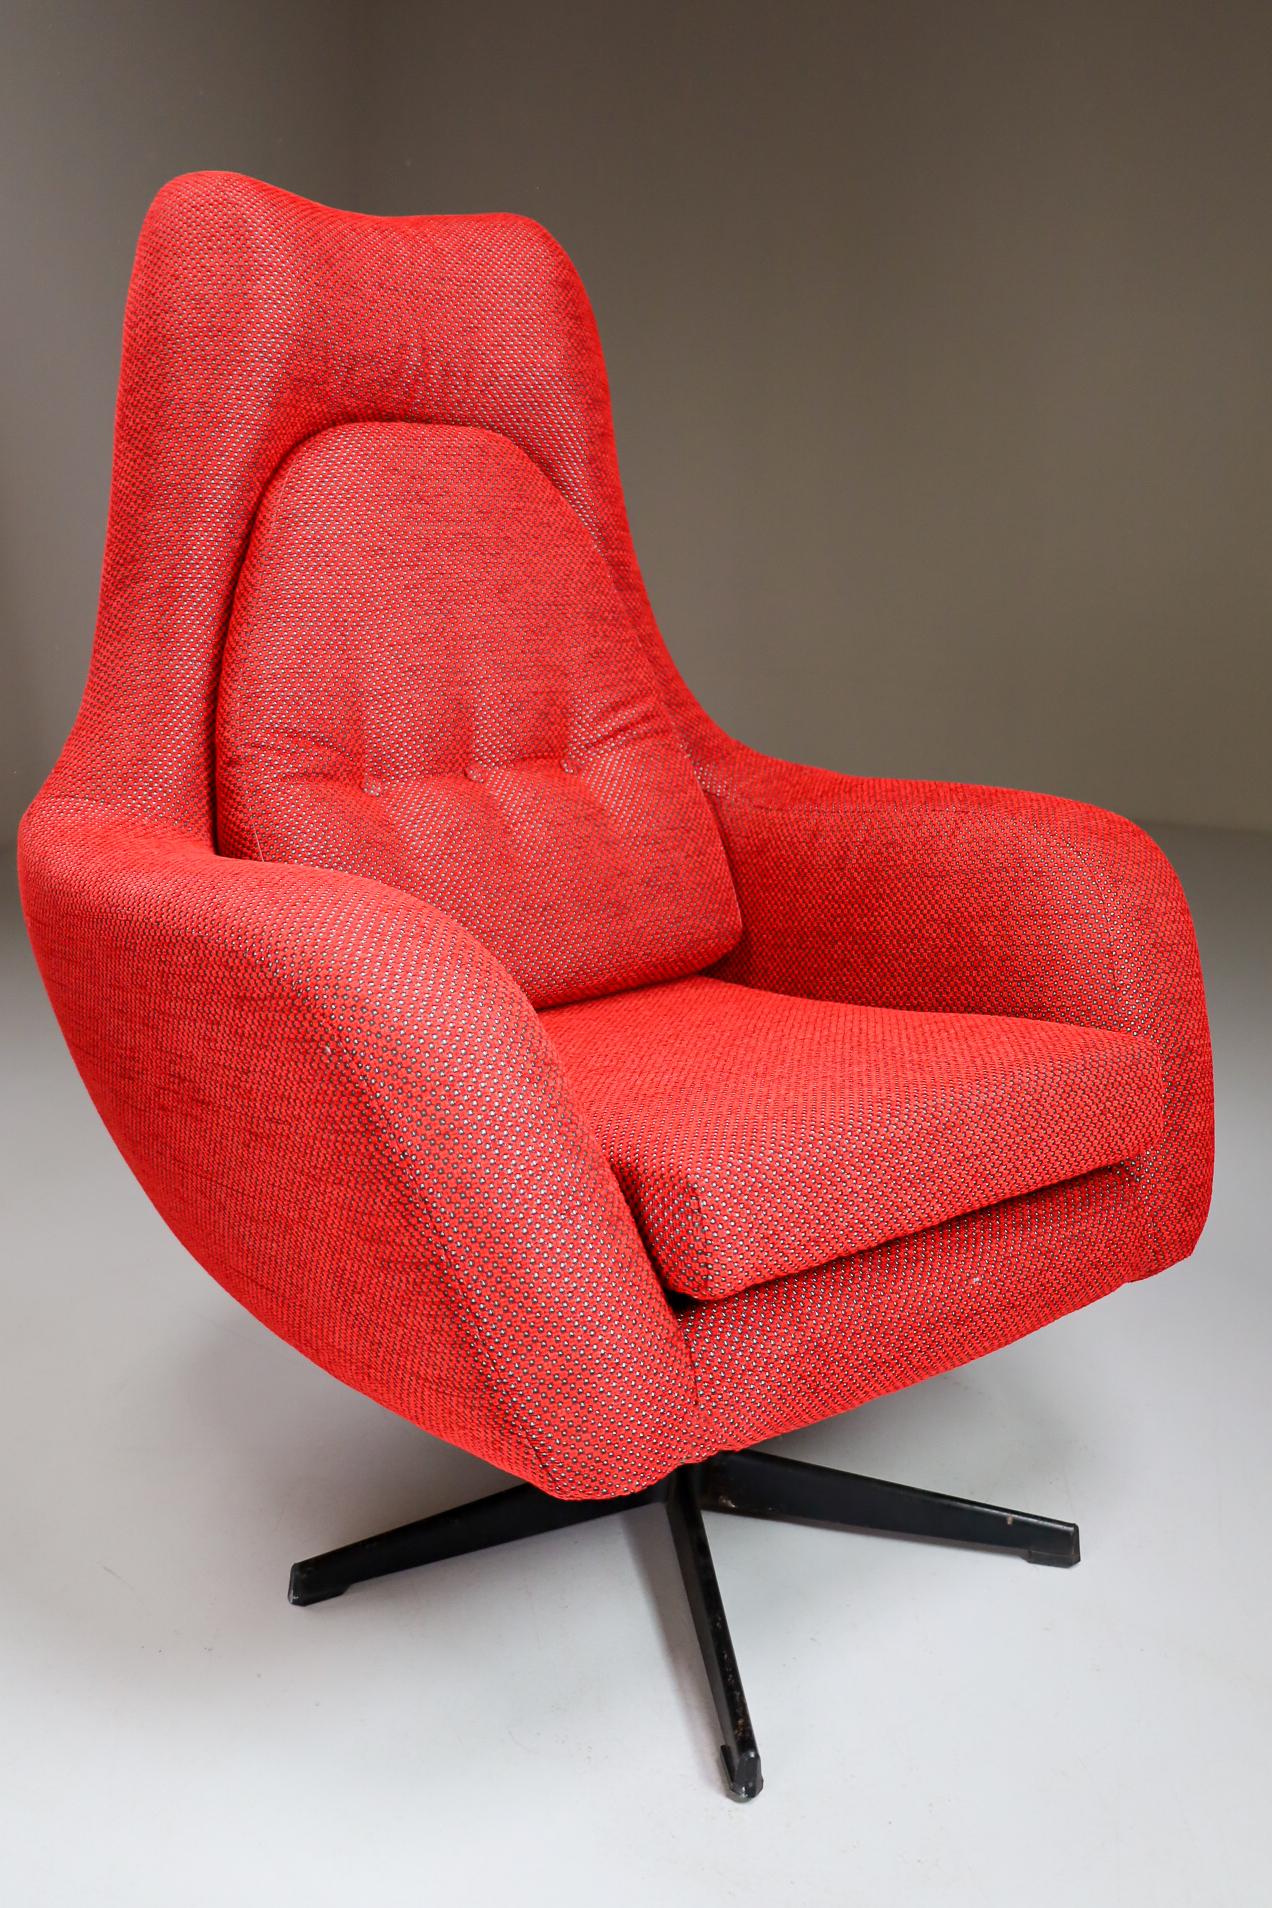 Pair of Swivel Chairs in New Reupholstered Red Fabric, Czech Republic 1970 For Sale 3